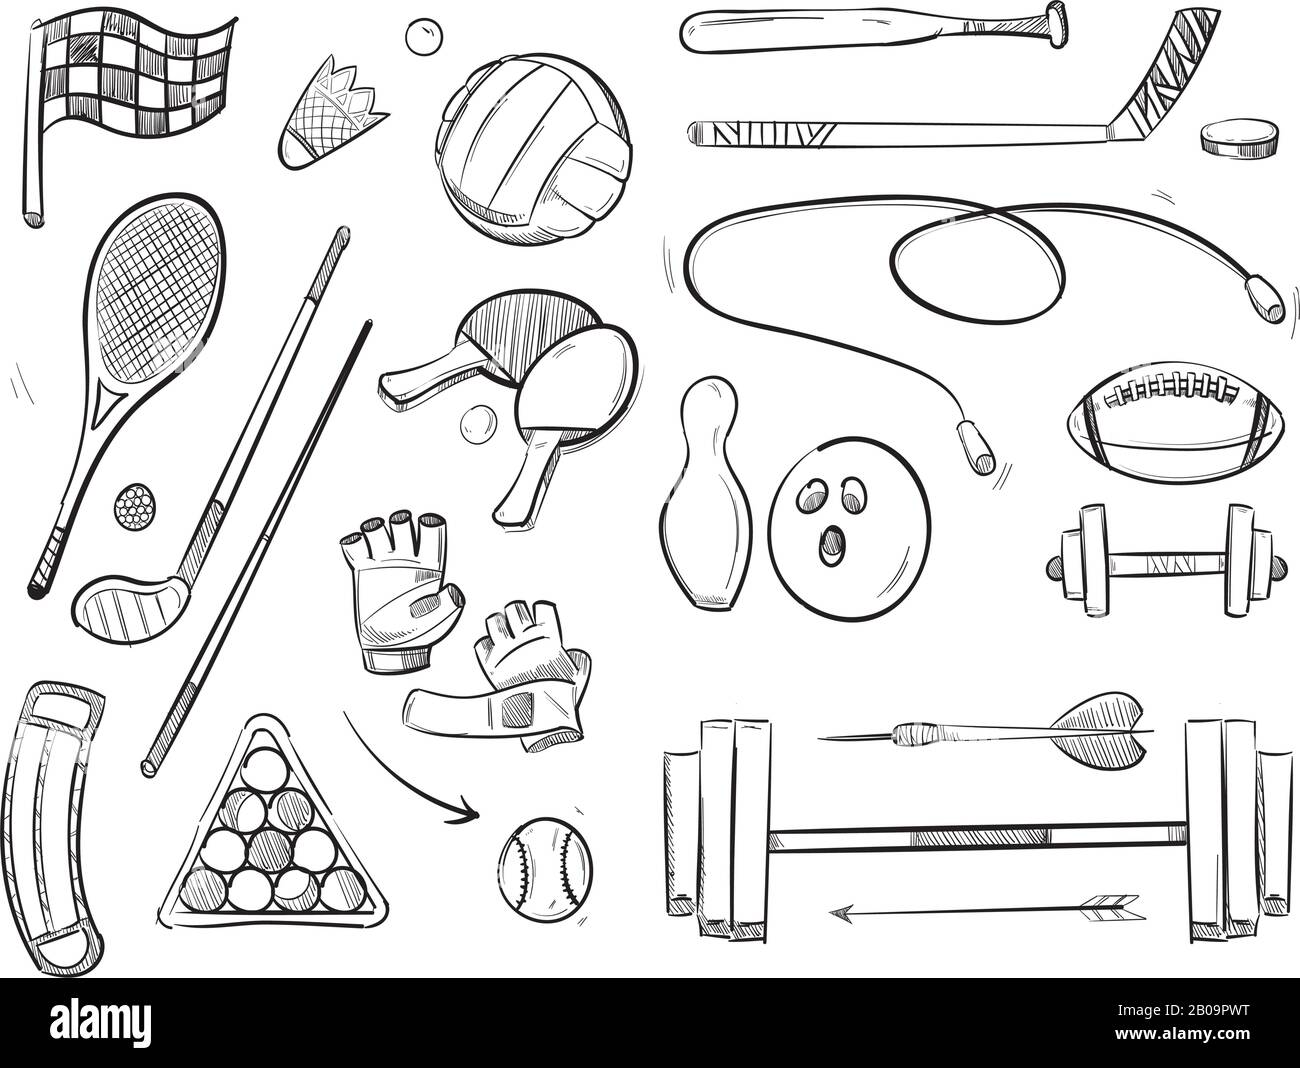 Doodle sketch sports and fitness vector icons. Sketch ball for ...